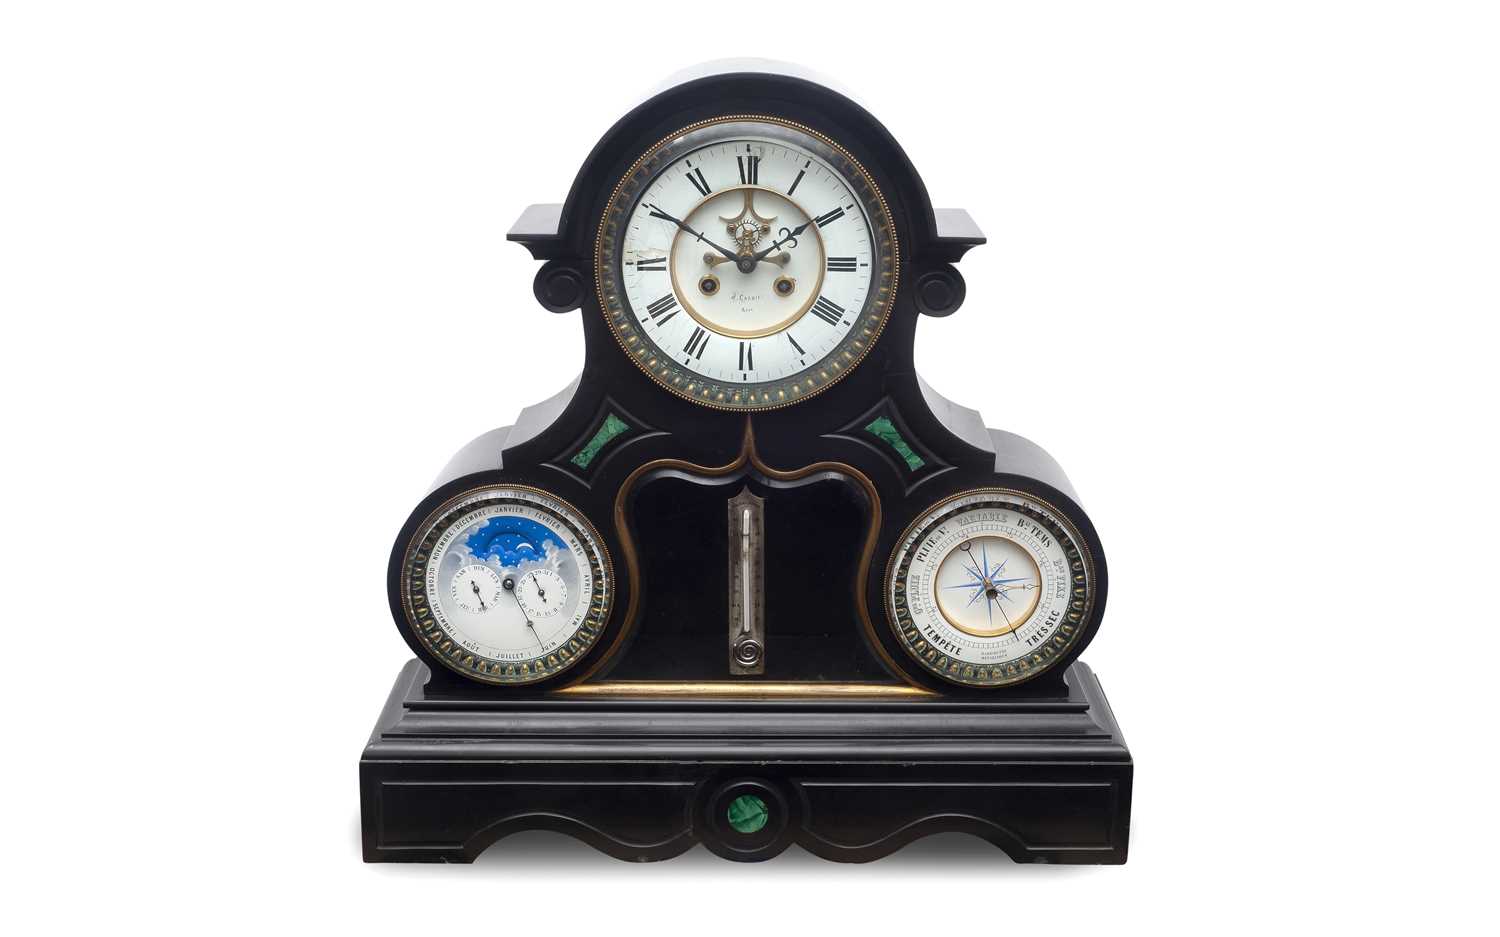 AN IMPRESSIVE 19TH CENTURY FRENCH PERPETUAL CALENDAR CLOCK WITH MOONPHASE AND BAROMETER